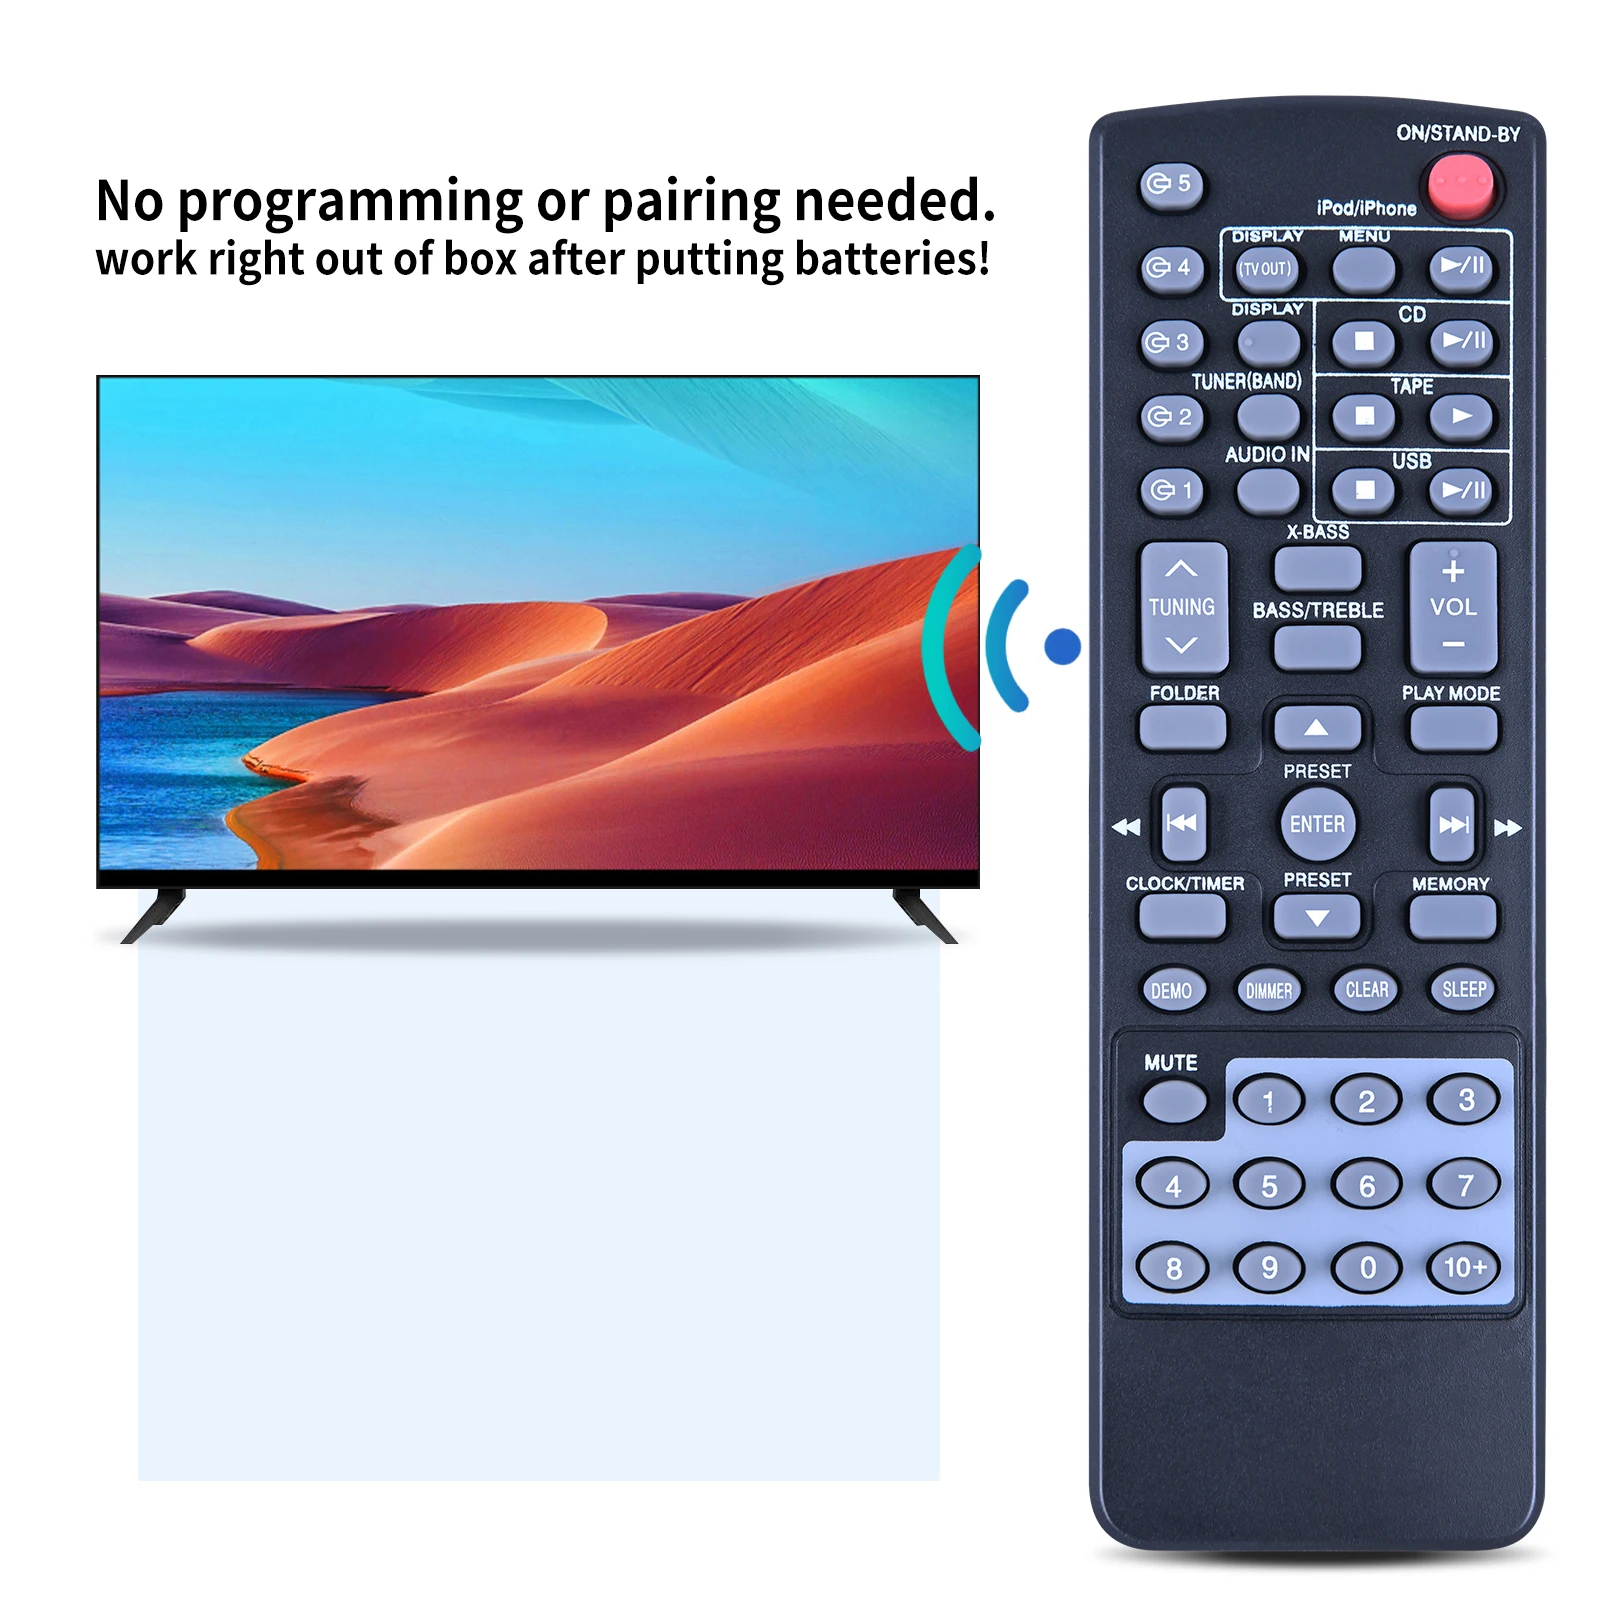 Remote control RRMCGA255AWSA for SHARP CD-DH950P CD-DHS1050P TV images - 6